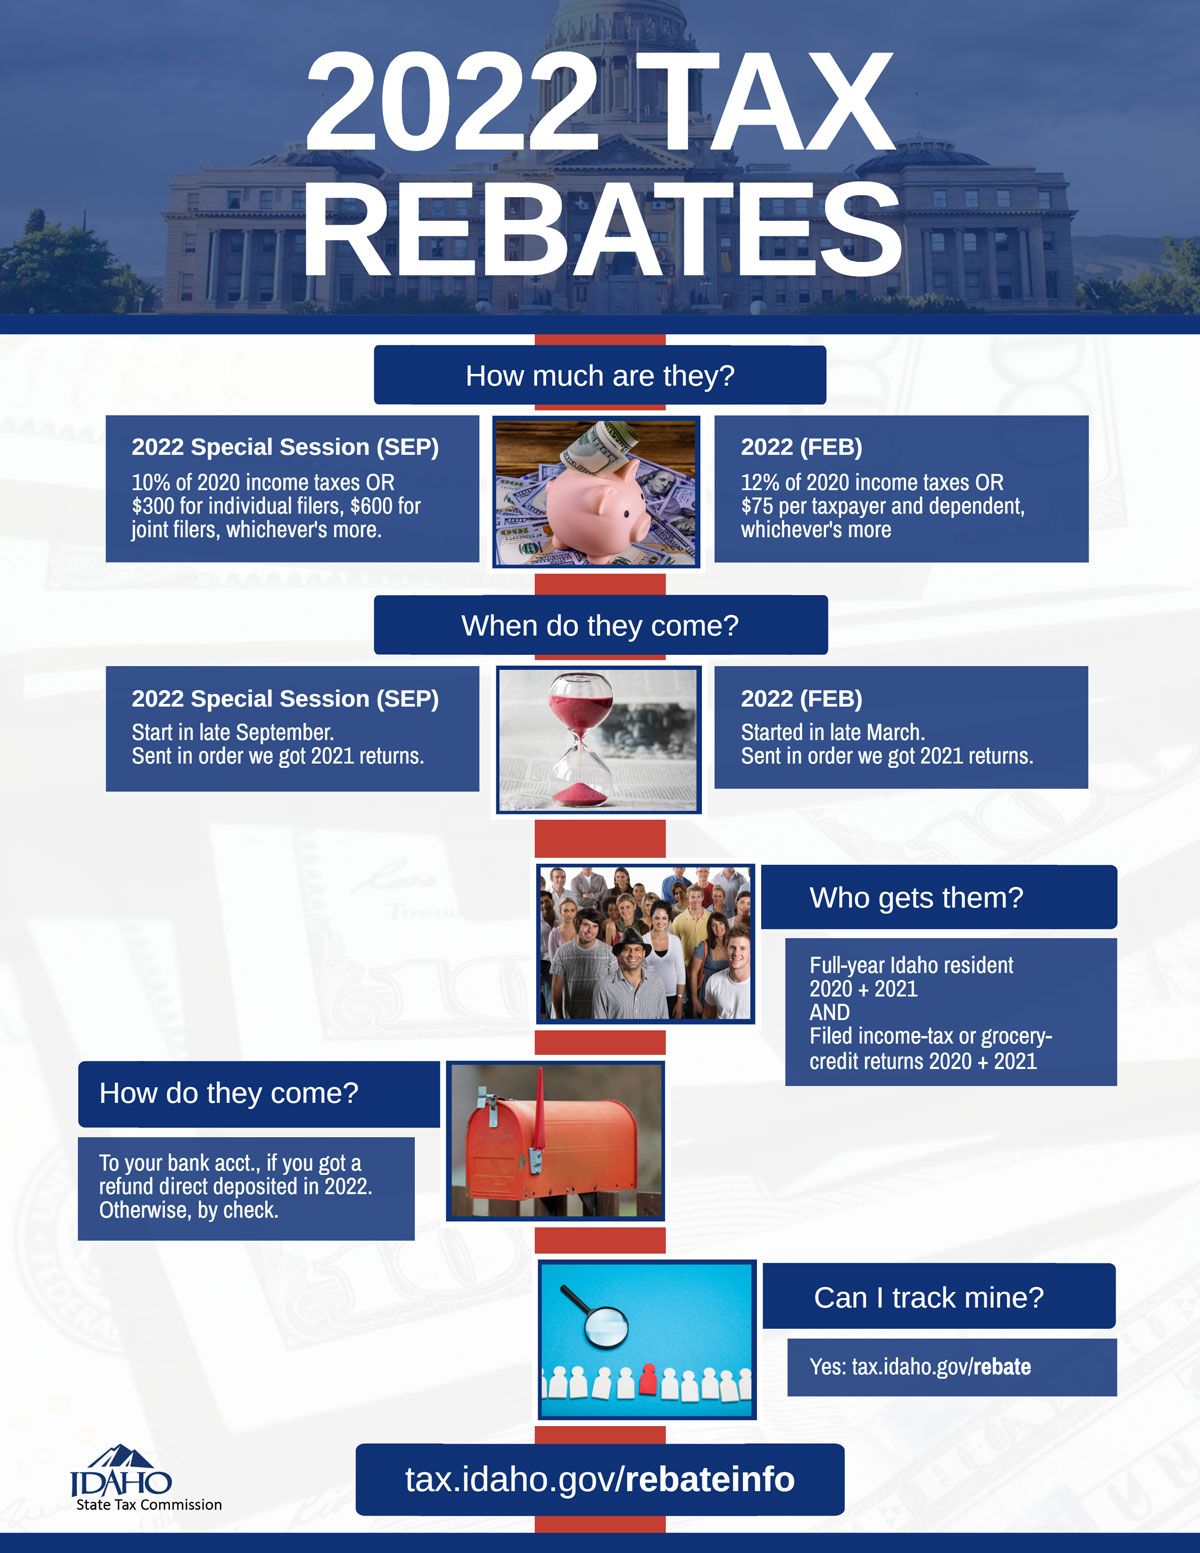 2022-tax-rebates-frequently-asked-questions-idaho-state-tax